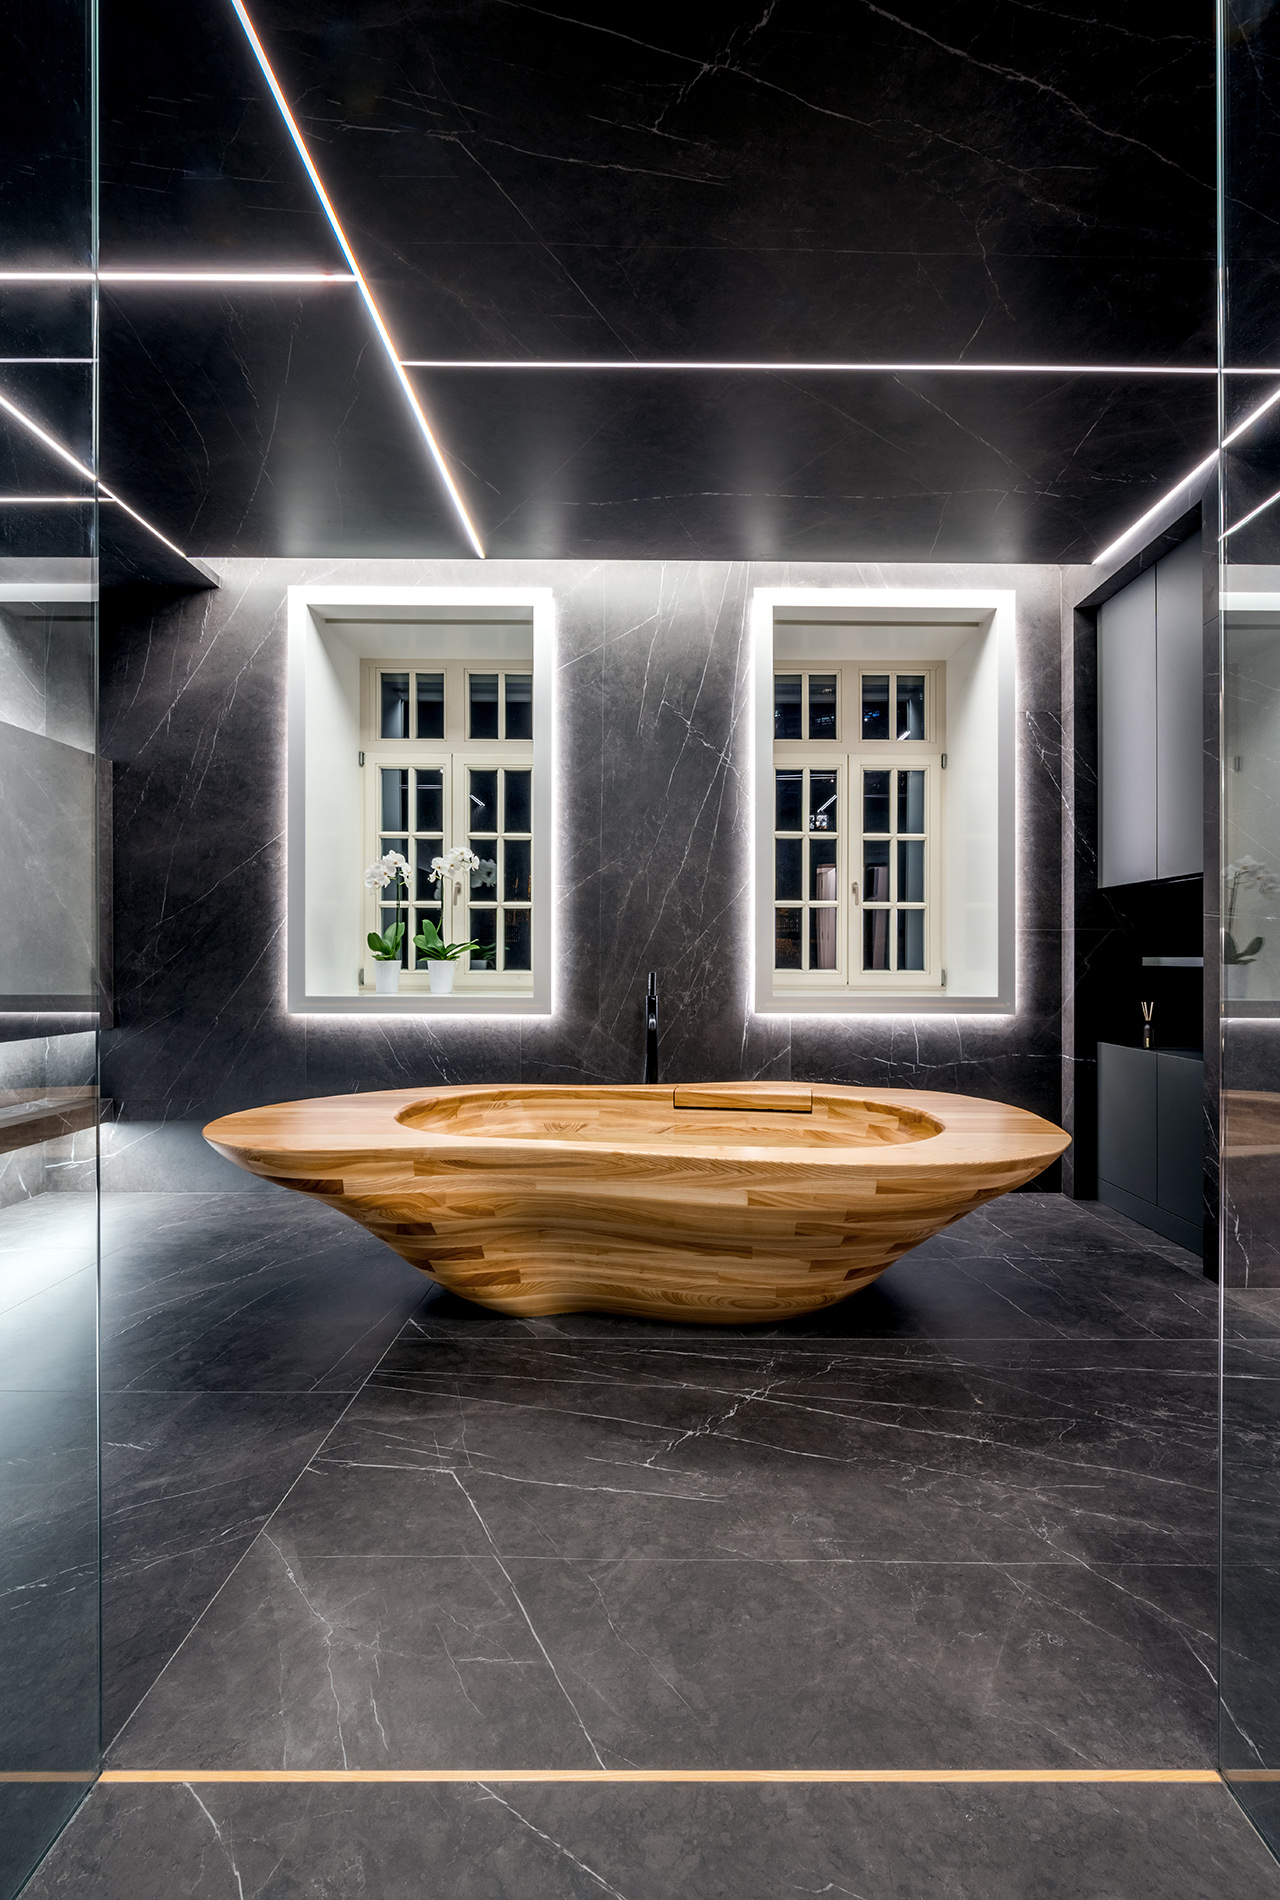 Image no. 2 of Custom bathtub and washbasin crafted in Ash wood - Defacto